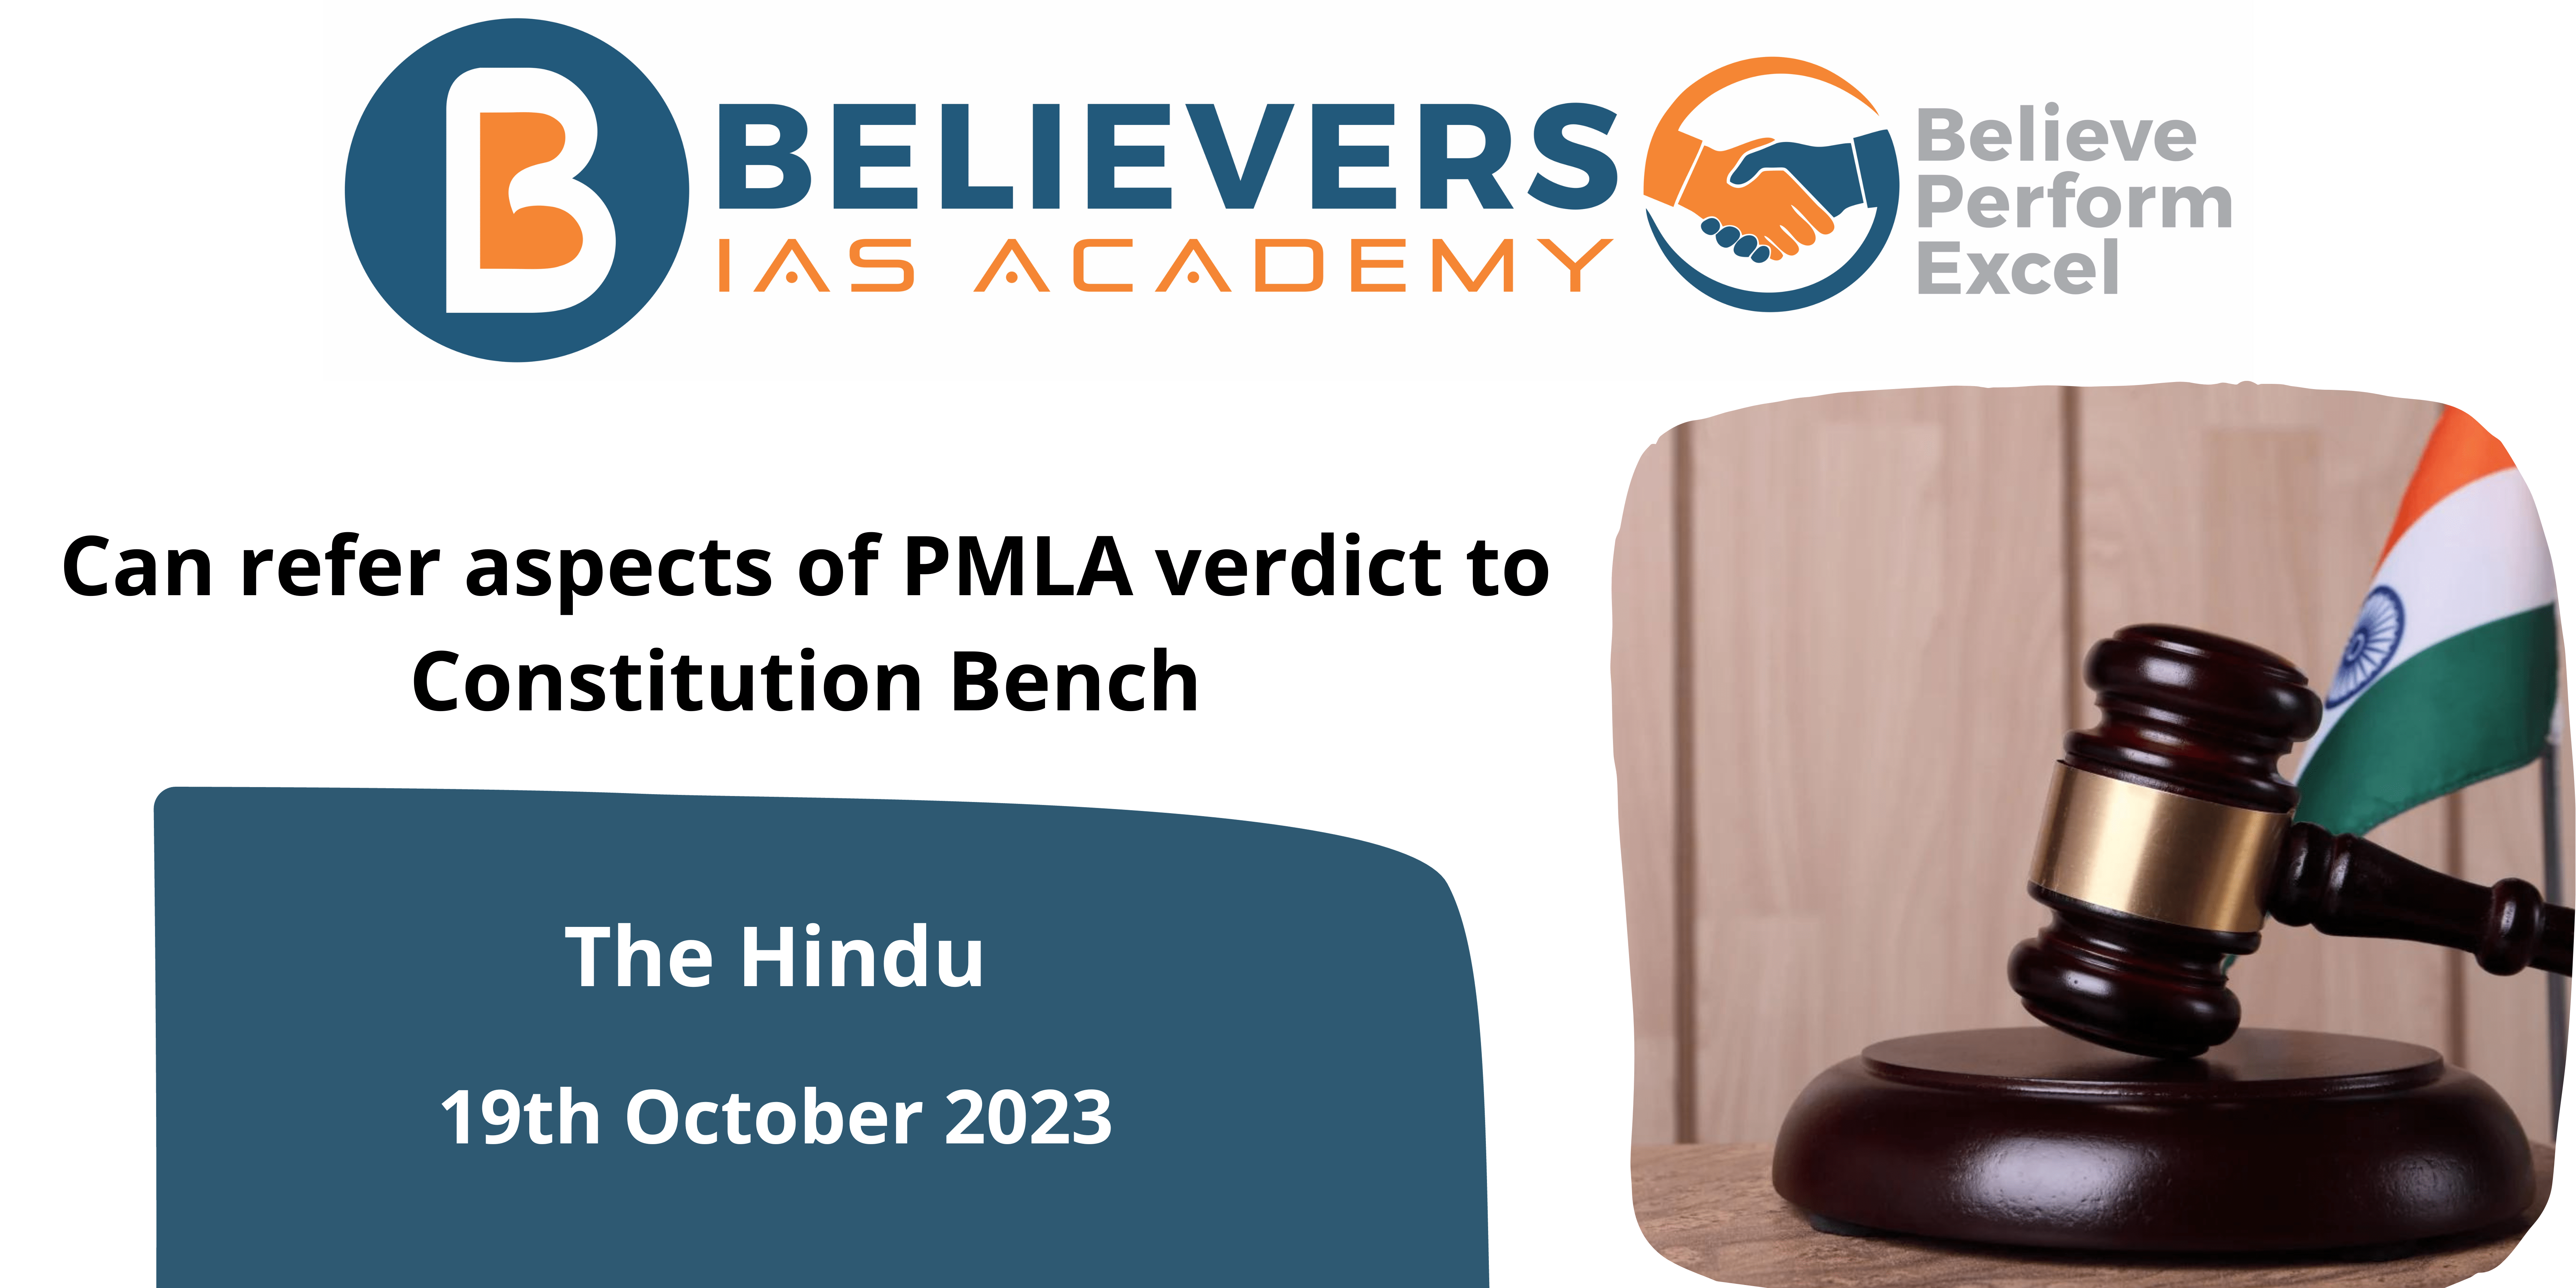 Can refer aspects of PMLA verdict to Constitution Bench